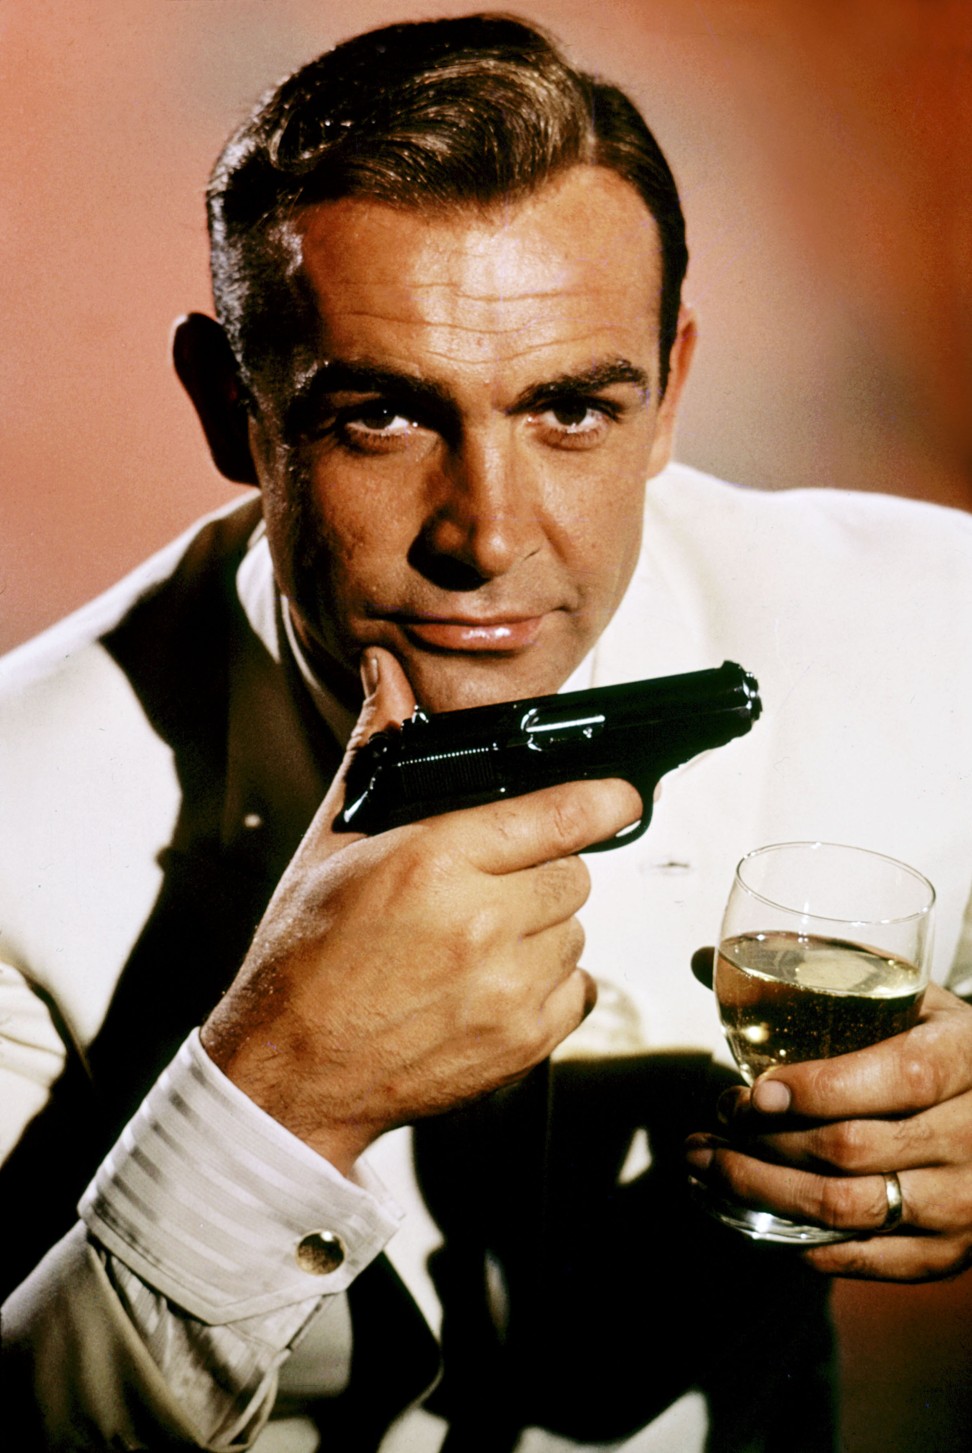 Sean Connery played the British super spy in the first James Bond film Dr. No. Photo: The Picture Desk